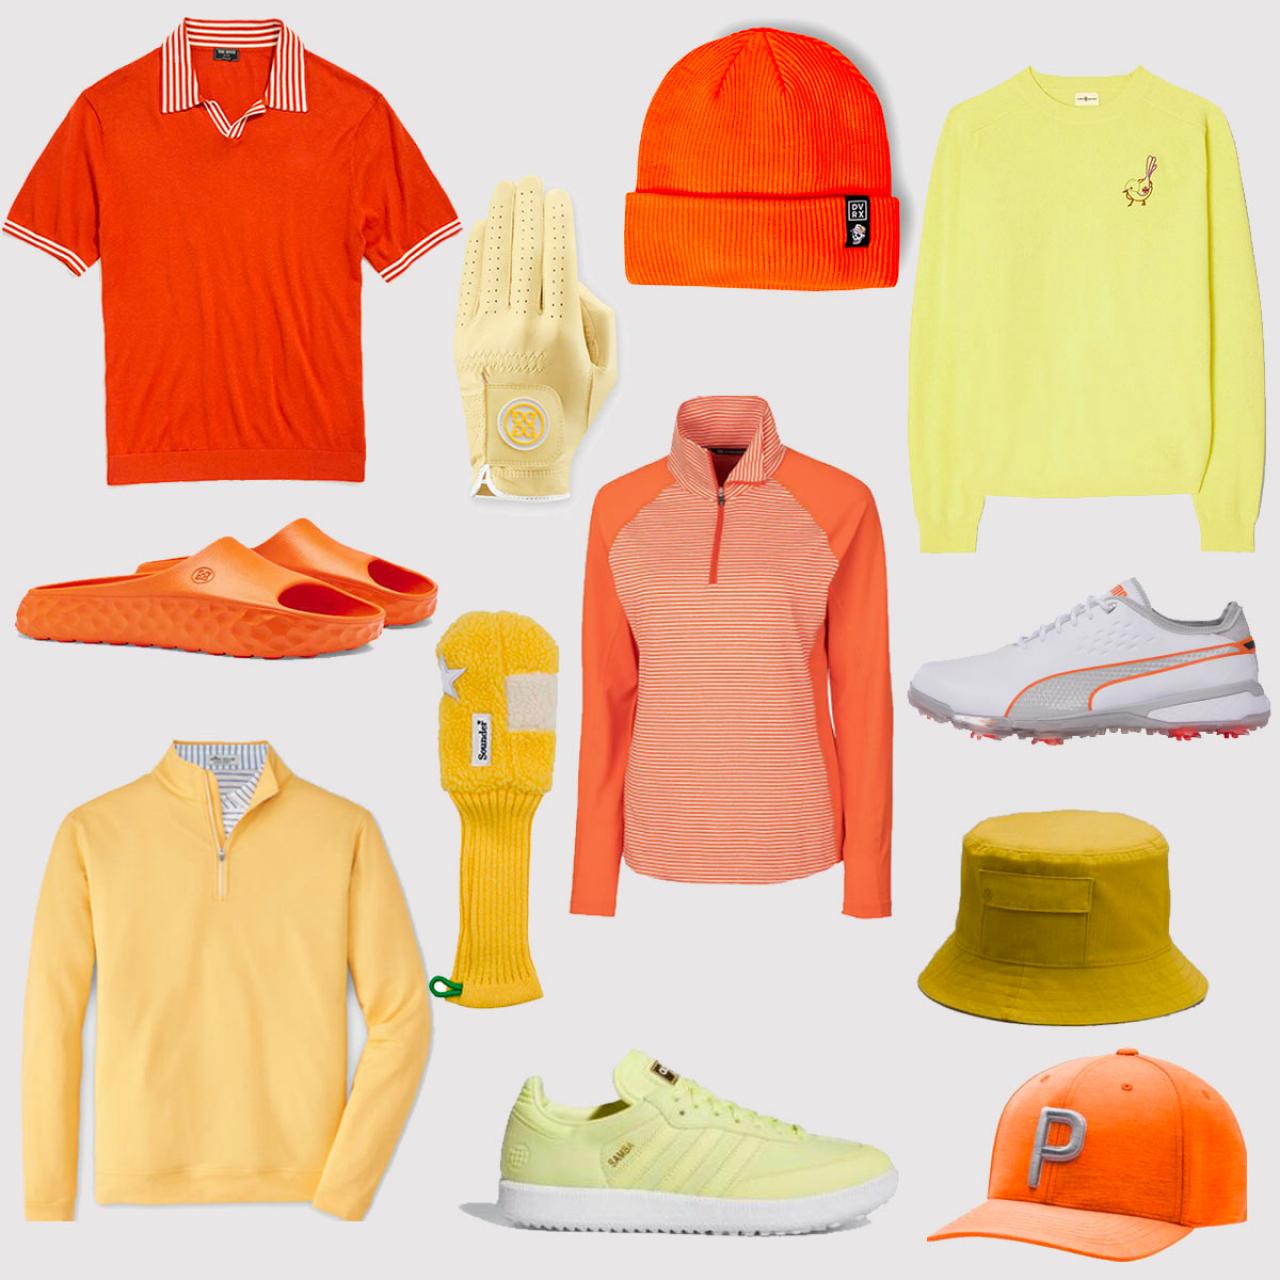 Wear | Balls, these to golf energize fall this Clubs, Bags Golf Equipment: your Golf colors | game Digest